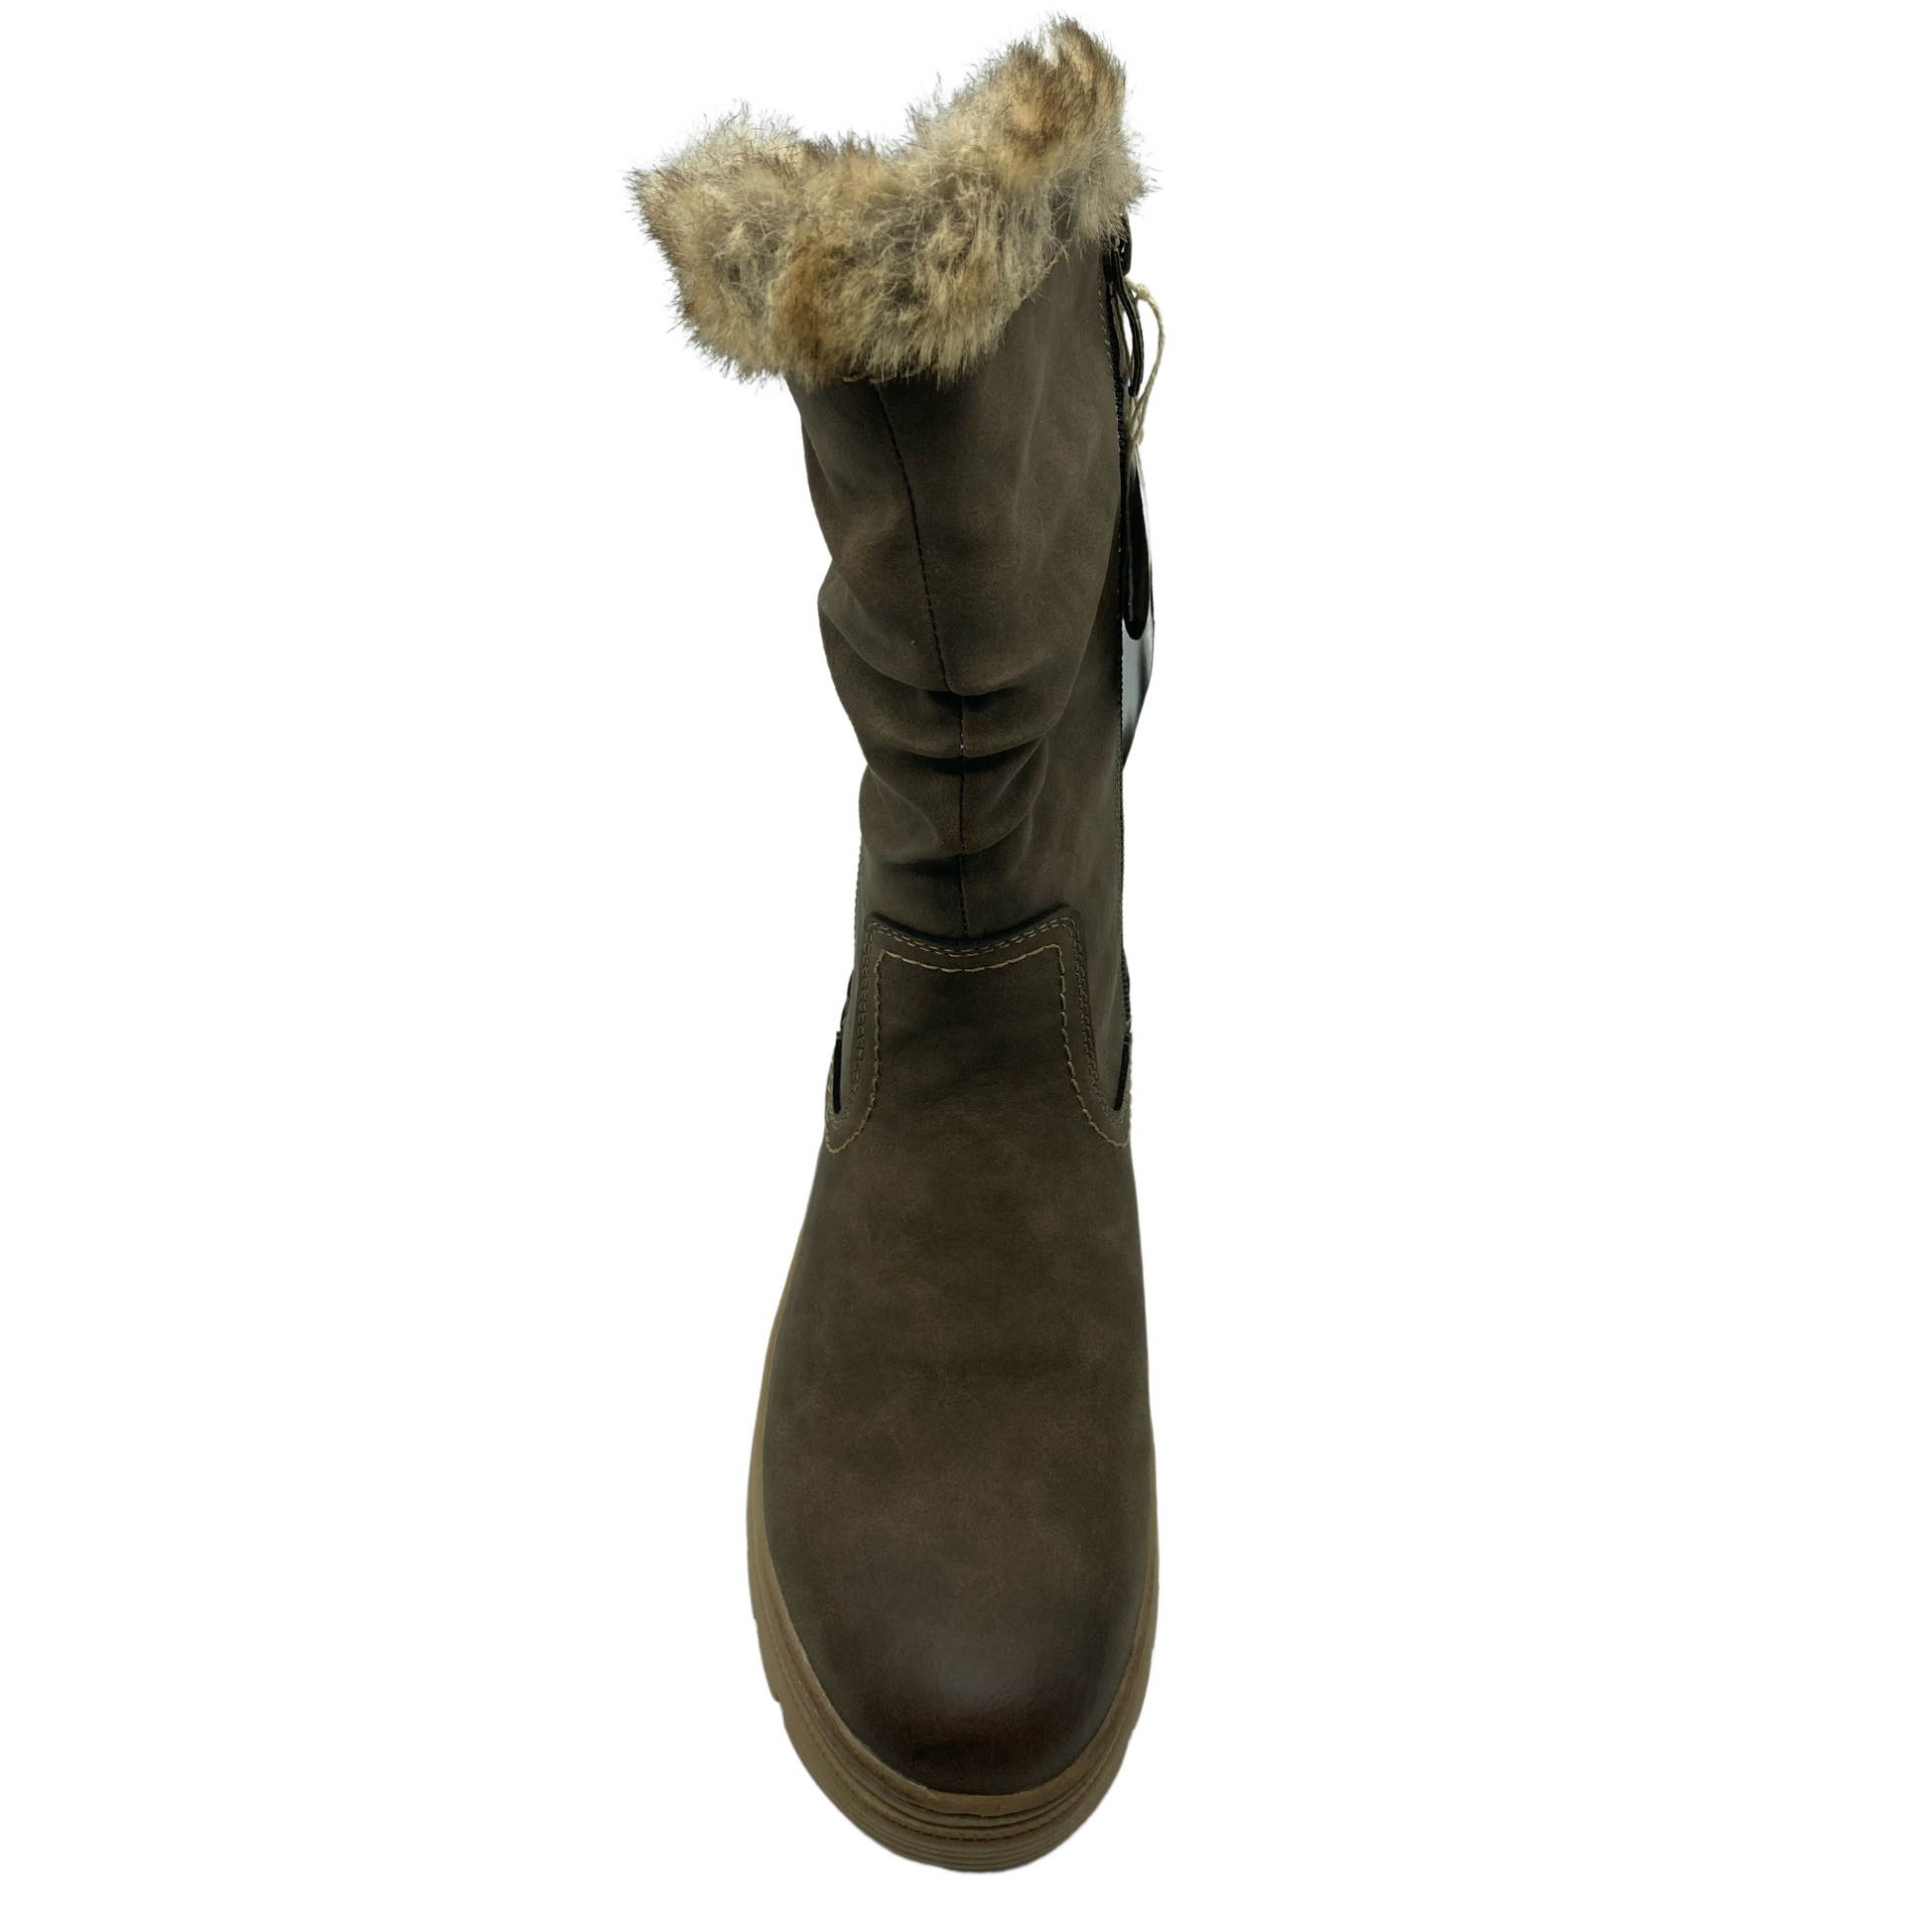 Top view of vegan suede calf height boot with faux fur lining and side zipper closure